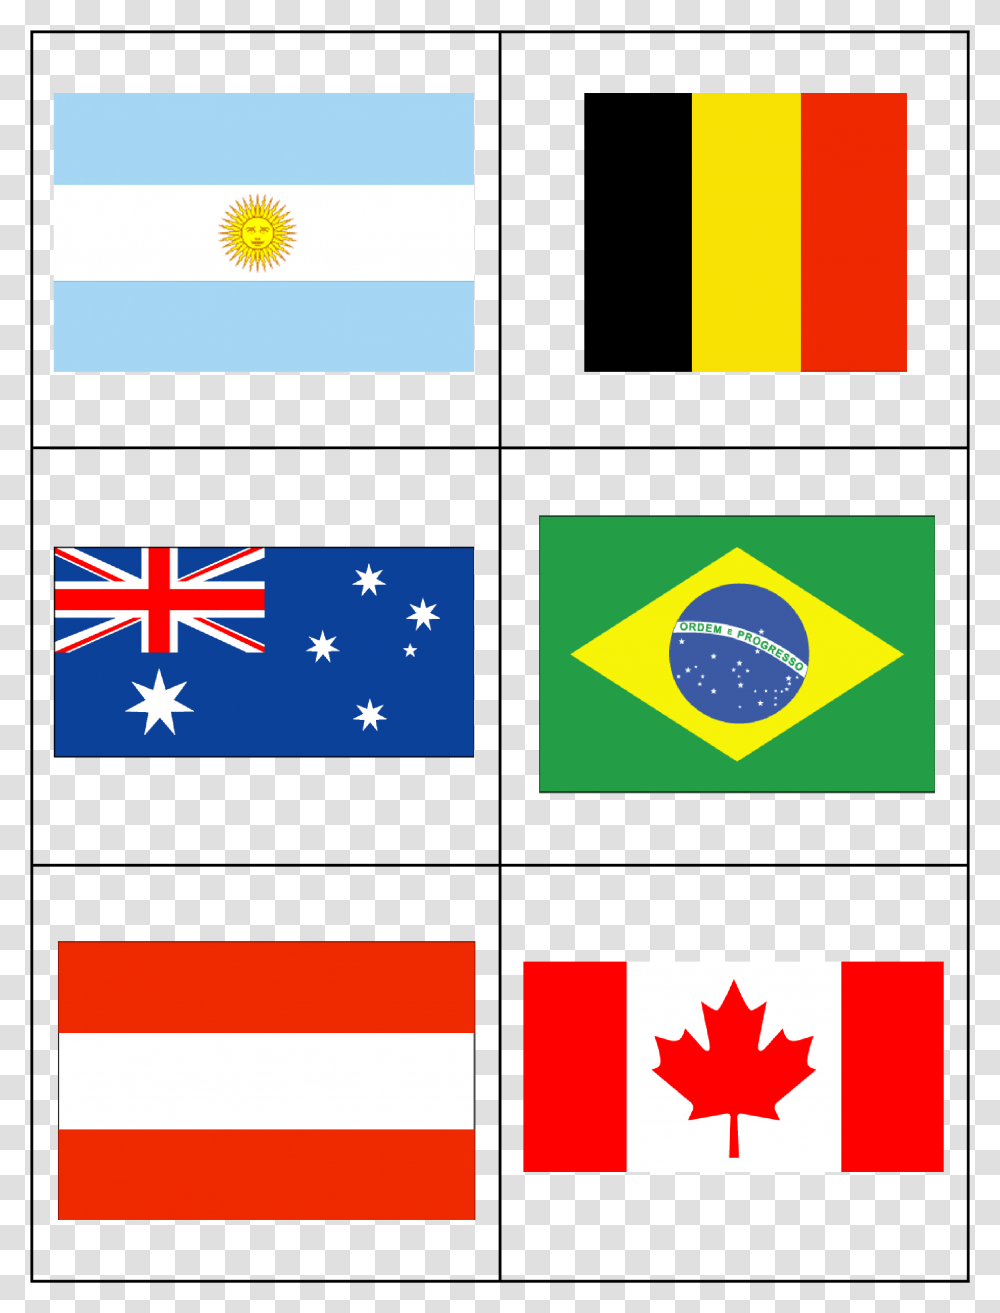 Flags Of Countries For Children Main Image English Speaking Countries Flags, Logo, Trademark Transparent Png